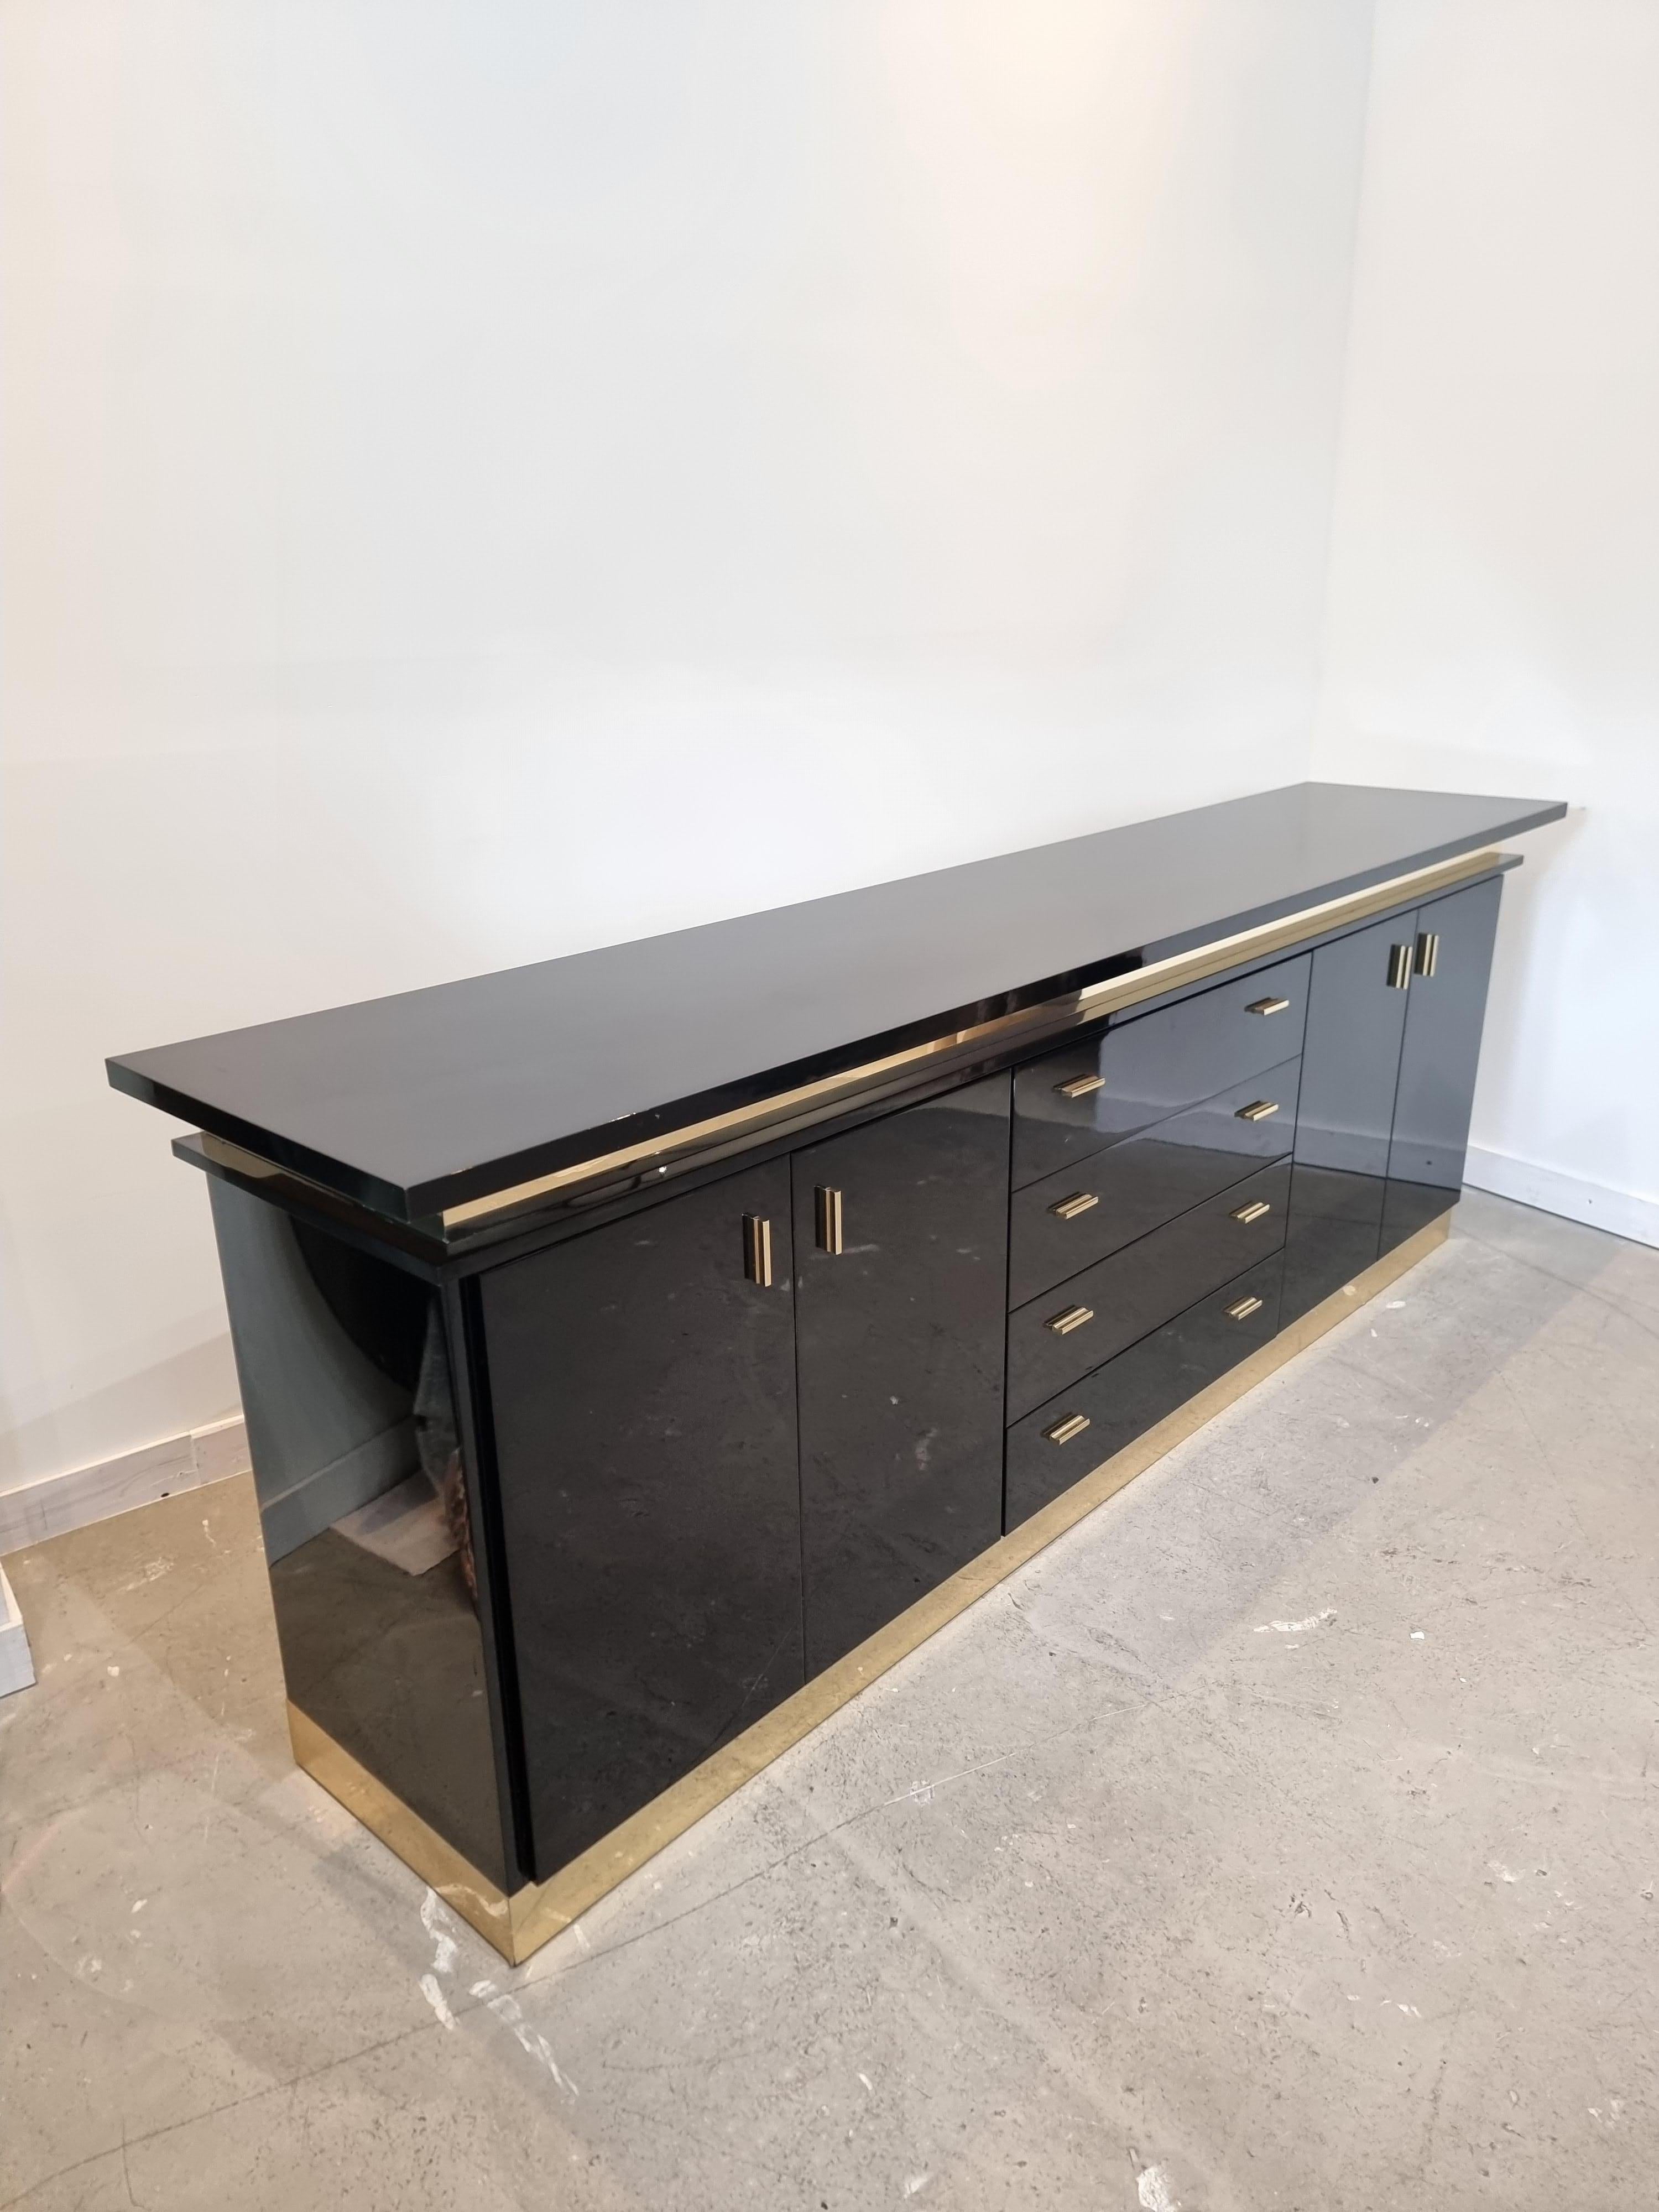 Stunning black lacquered sideboard by Jean Clause Mahey, France, 1970s. High quality piece, wooden base finished in a high gloss black lacquer and chic golden/brass details.

Provided with four doors and four shelving units, middle section.

In